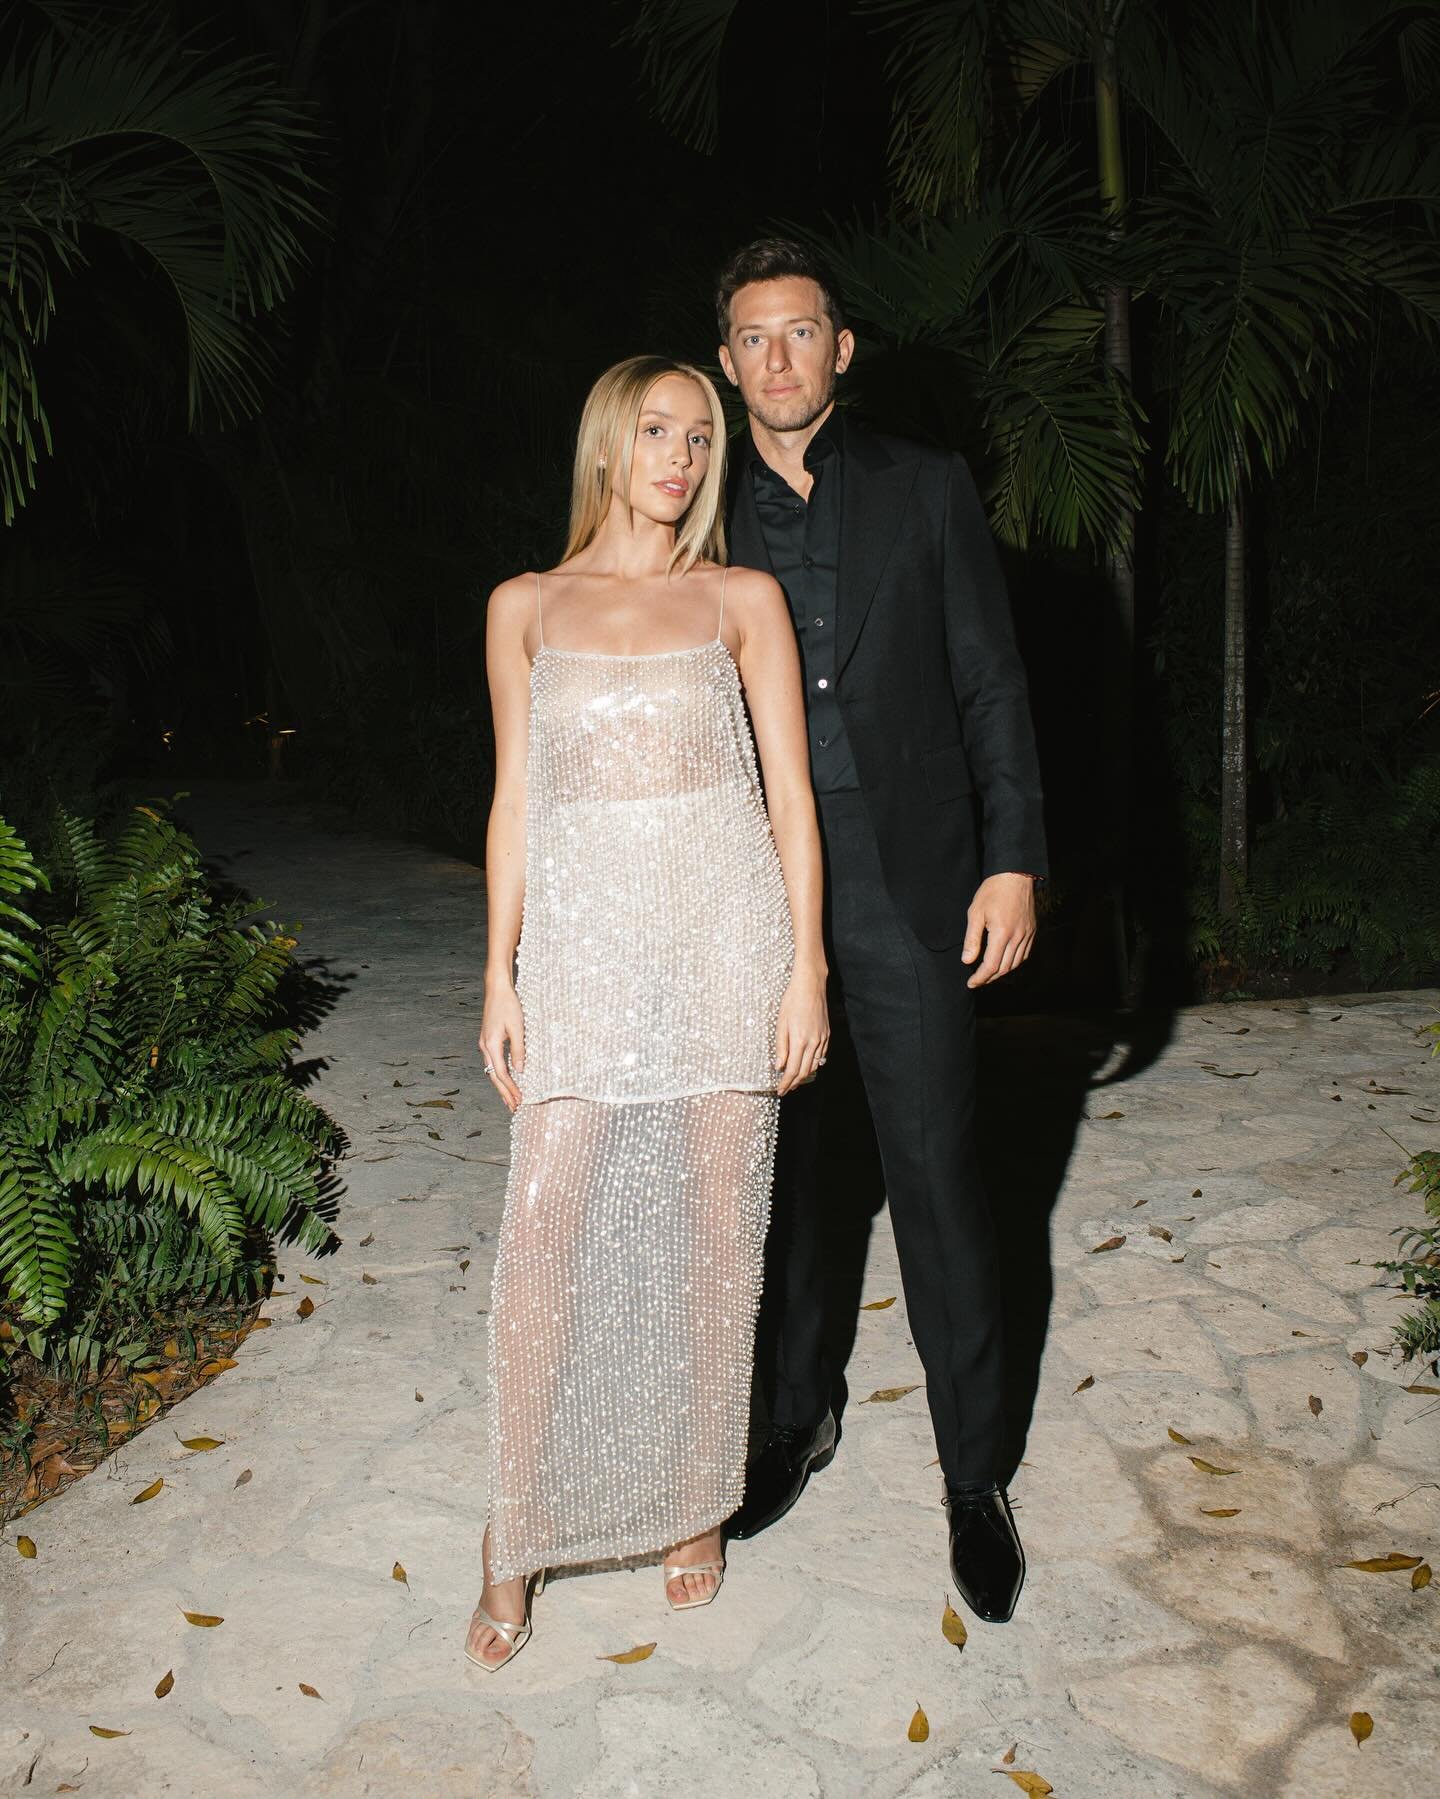 Night one of @alexandracooper and Matt Kaplan&rsquo;s Riviera Maya wedding weekend kicked off with pearls and espresso martini&rsquo;s. 

See the beautiful feature in @vogueweddings. Planning by @bashplease. 

Photos were edited using the KMP Day to 